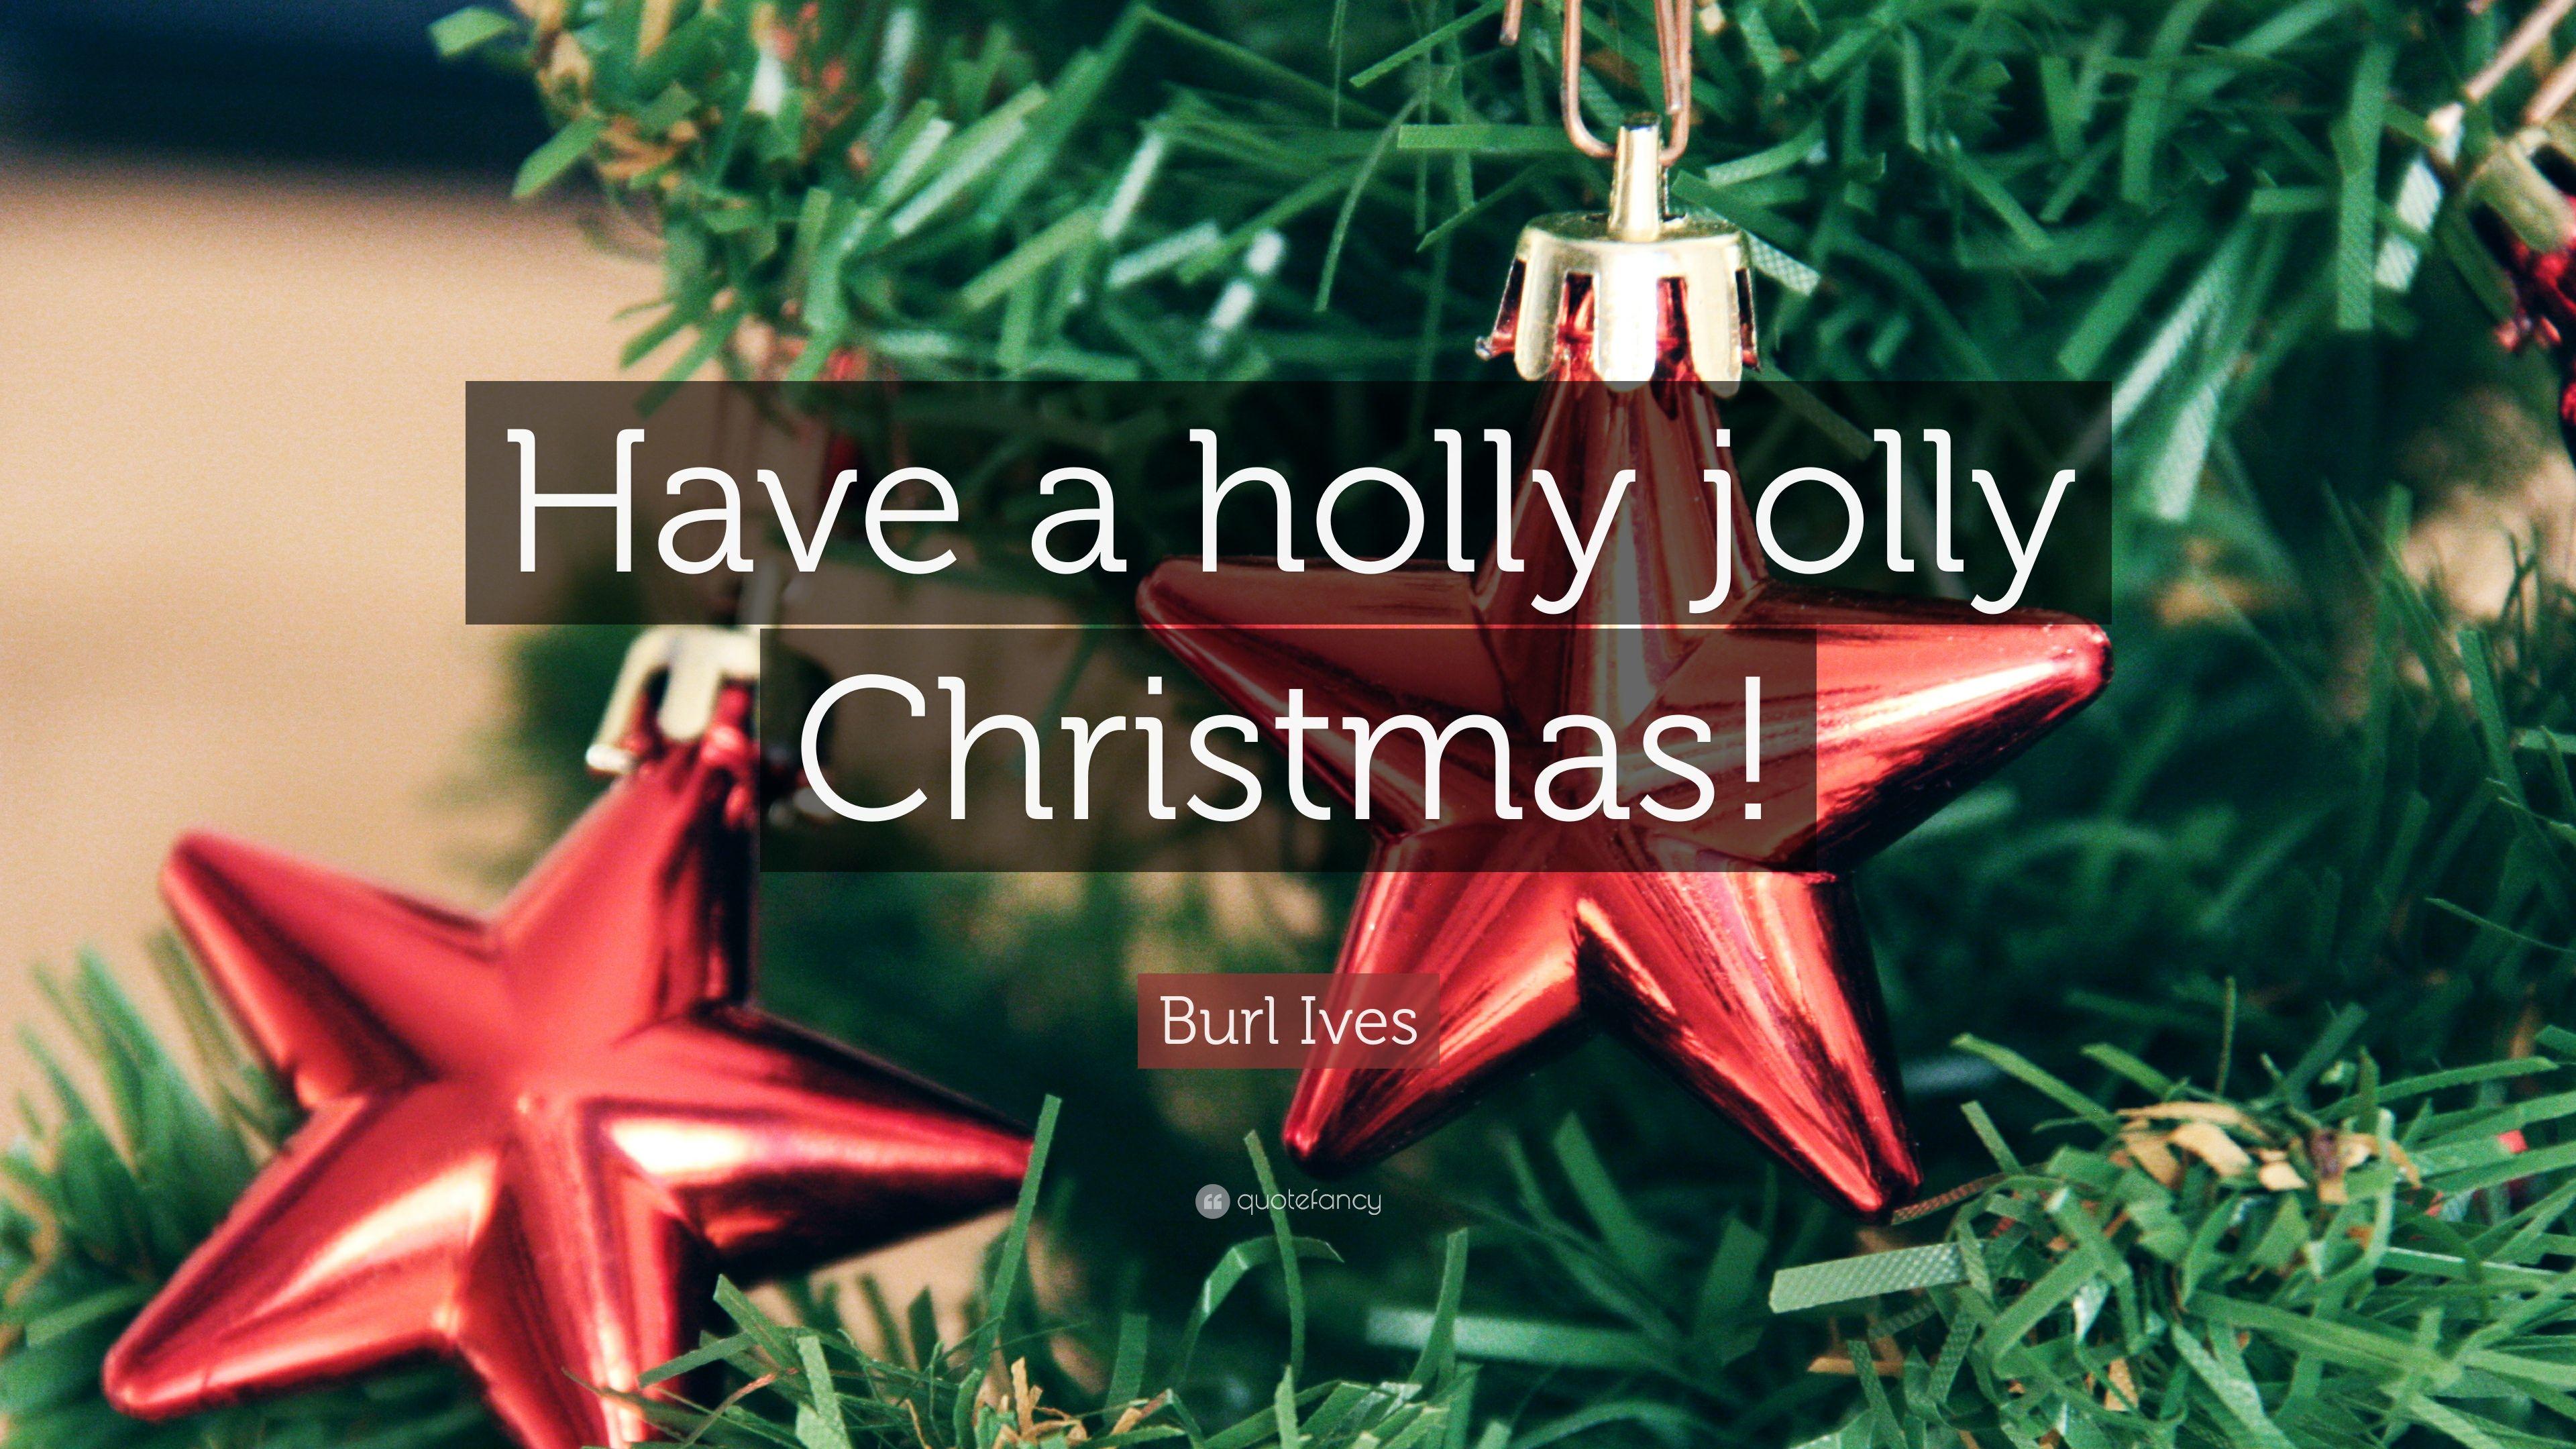 Burl Ives Quote: “Have a holly jolly Christmas!” 7 wallpaper